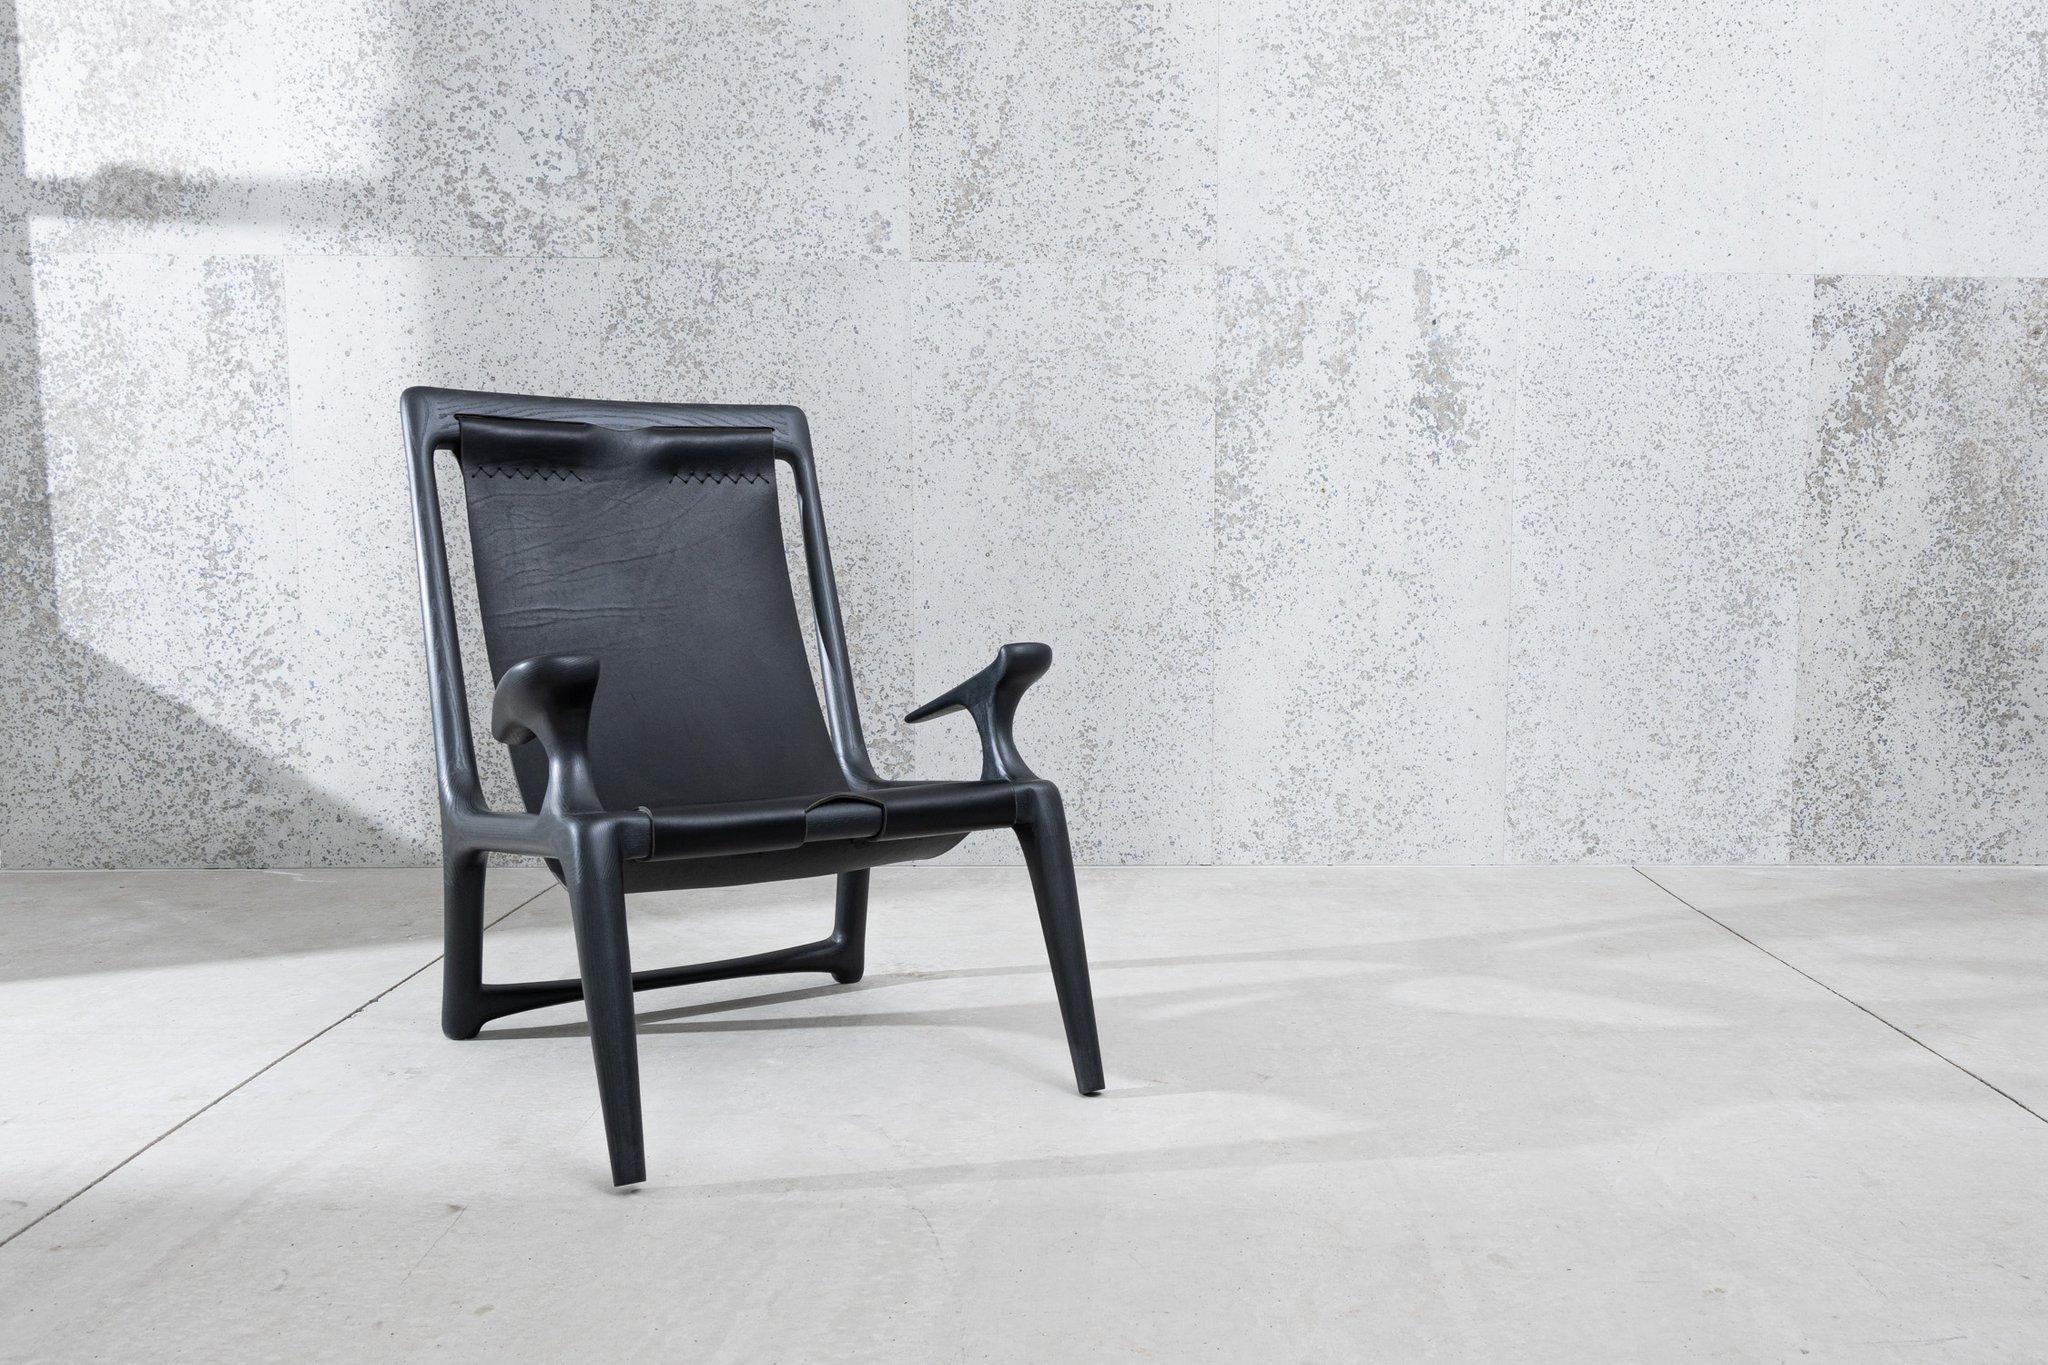 Charcoal ash & leather sling chair by Fernweh Woodworking
Dimensions: 
W 27